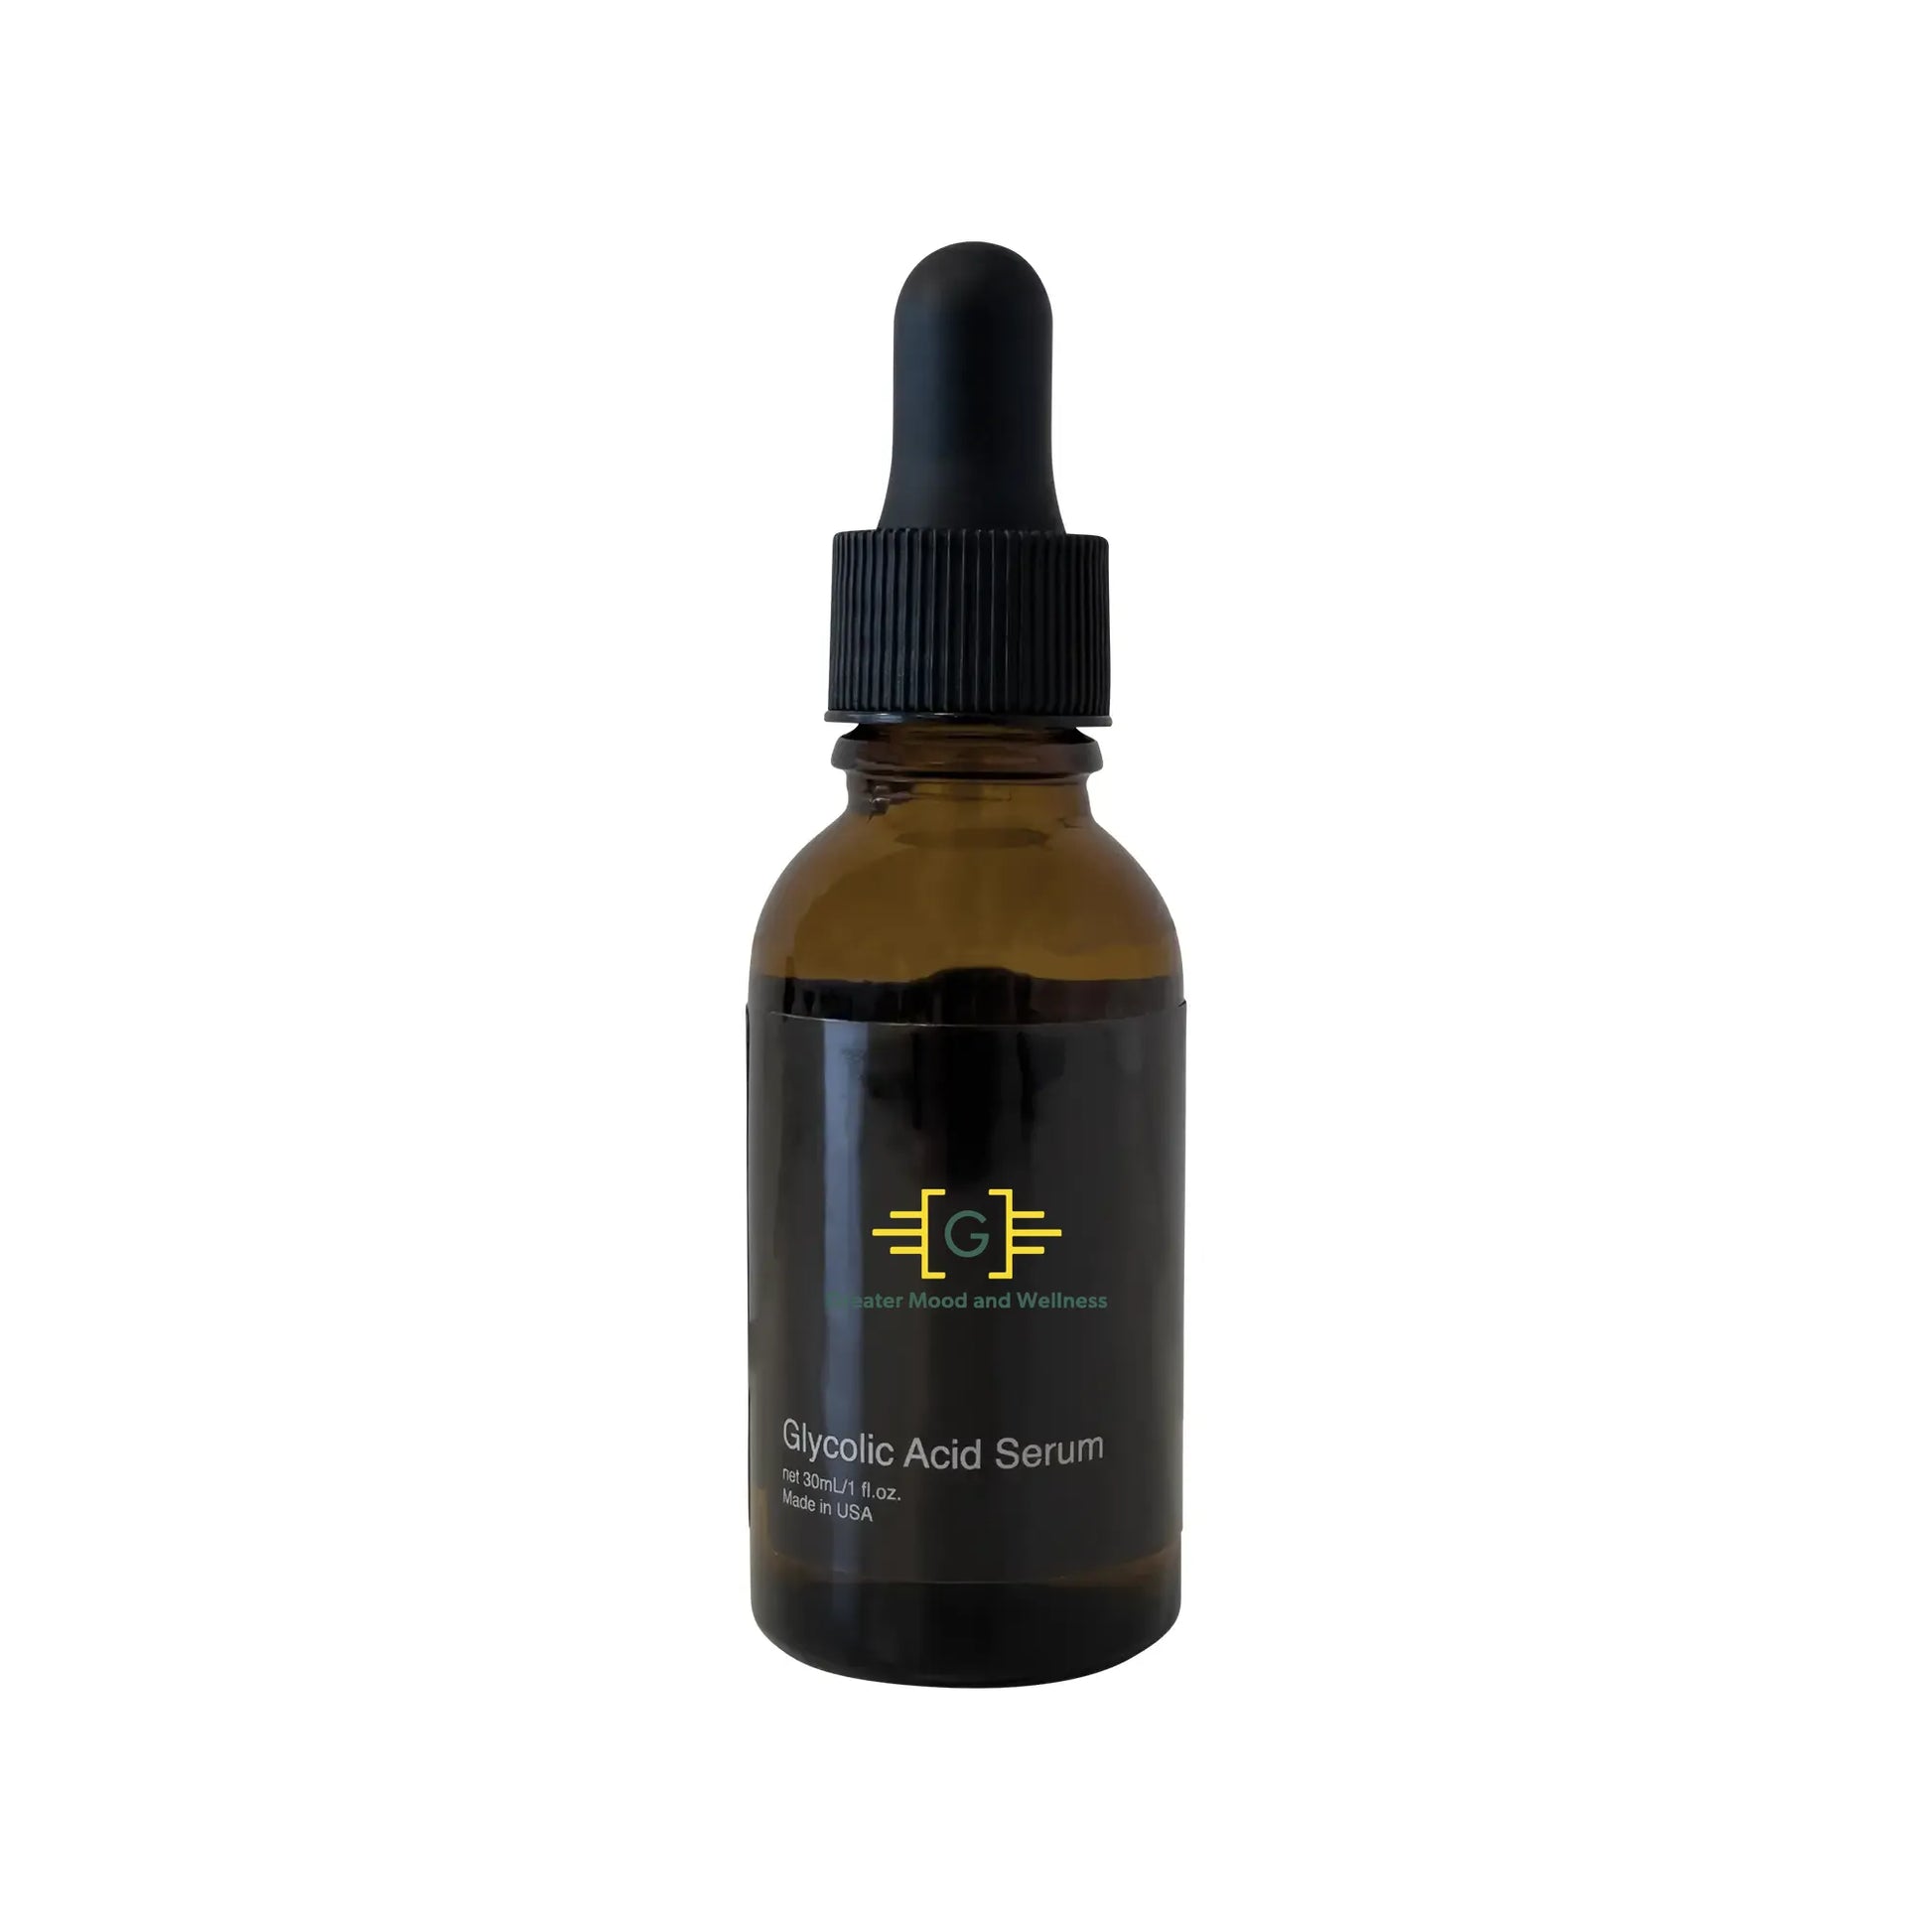 Glycolic Acid Serum facial oil in a bottle against a white backdrop